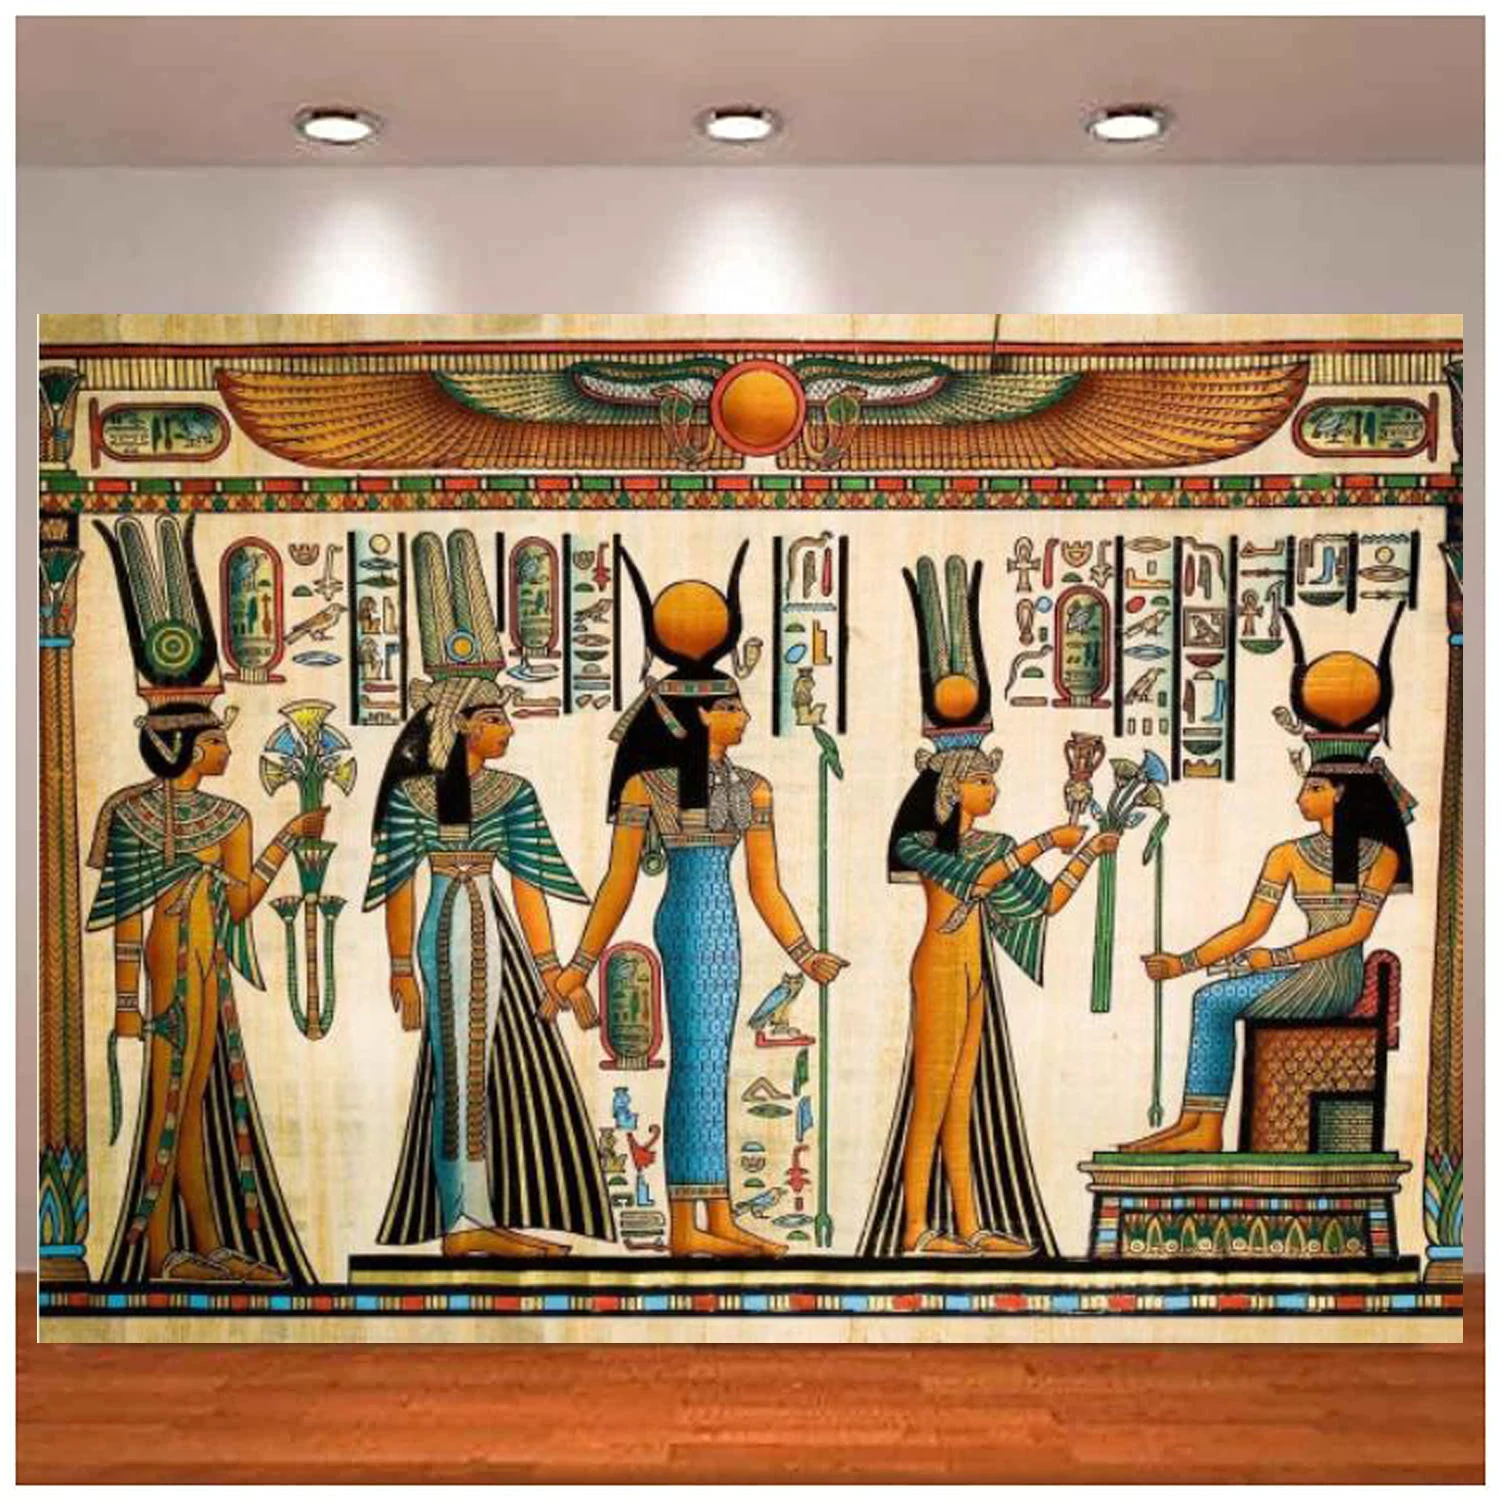 

Egyptian Banner Quinto Tomb Painting Photography Backdrop For Party Decoration Supplies Photoshoot Photo Background Props